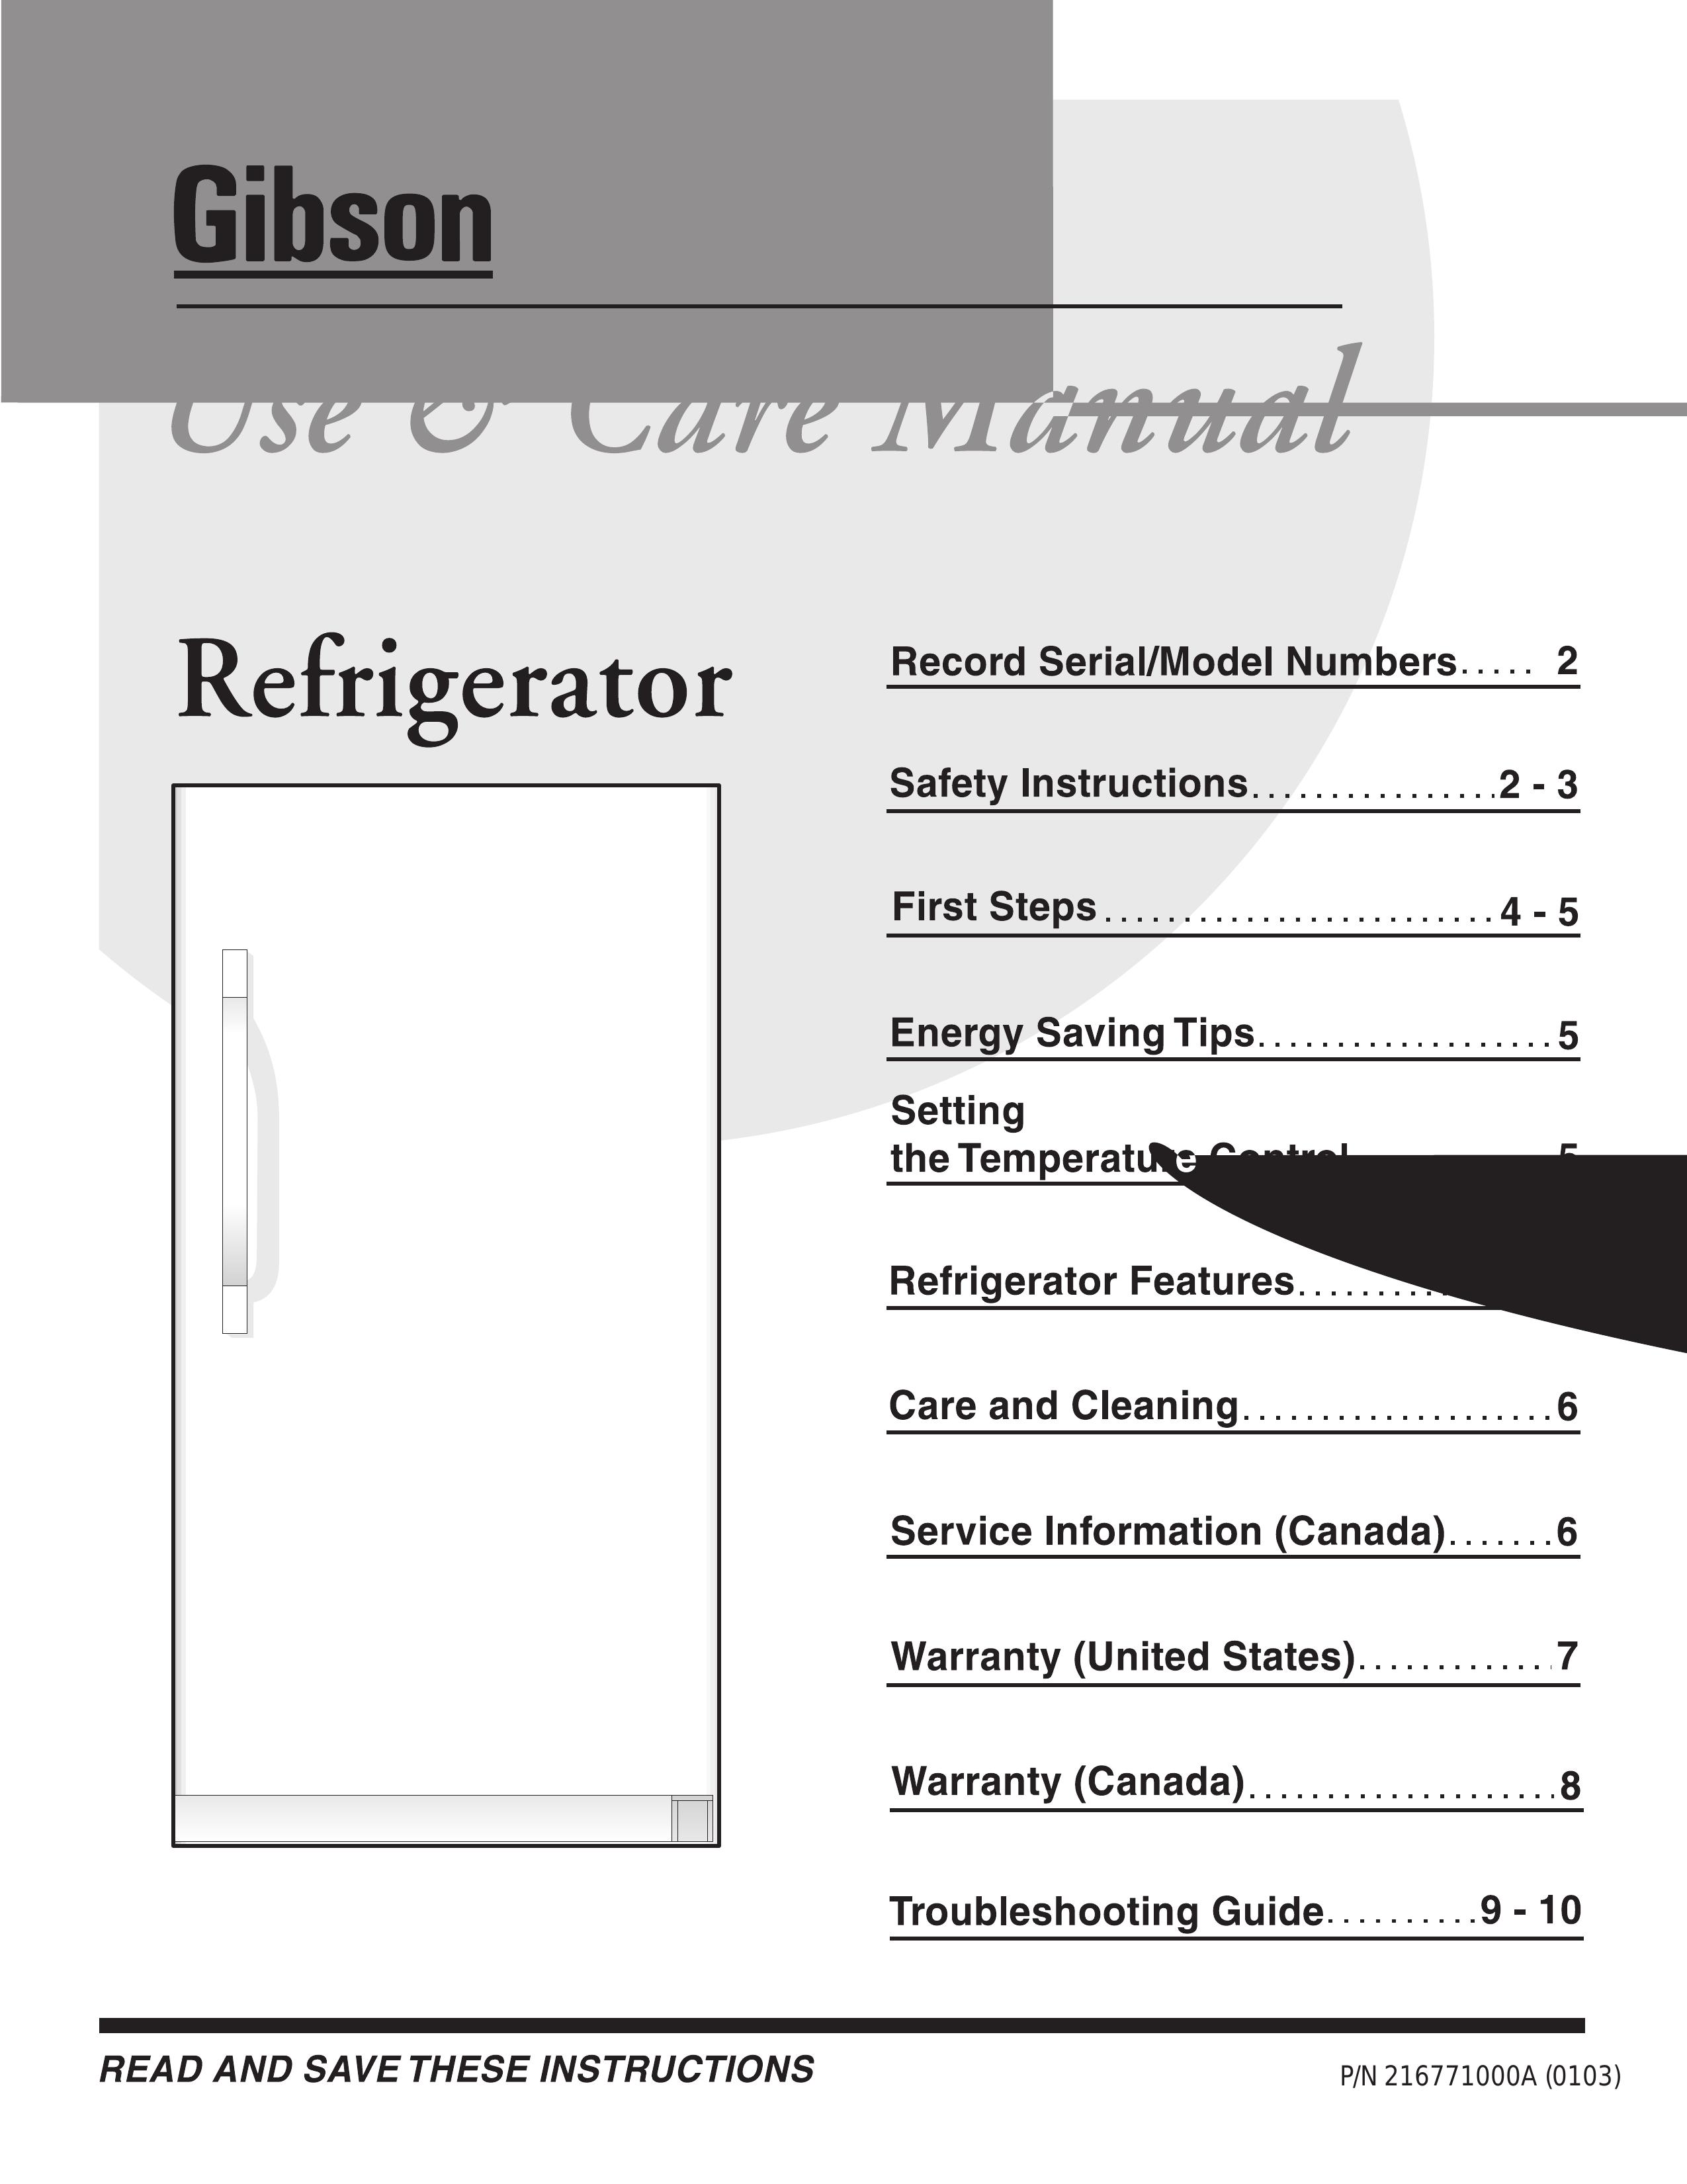 Electrolux - Gibson 216771000A Refrigerator User Manual